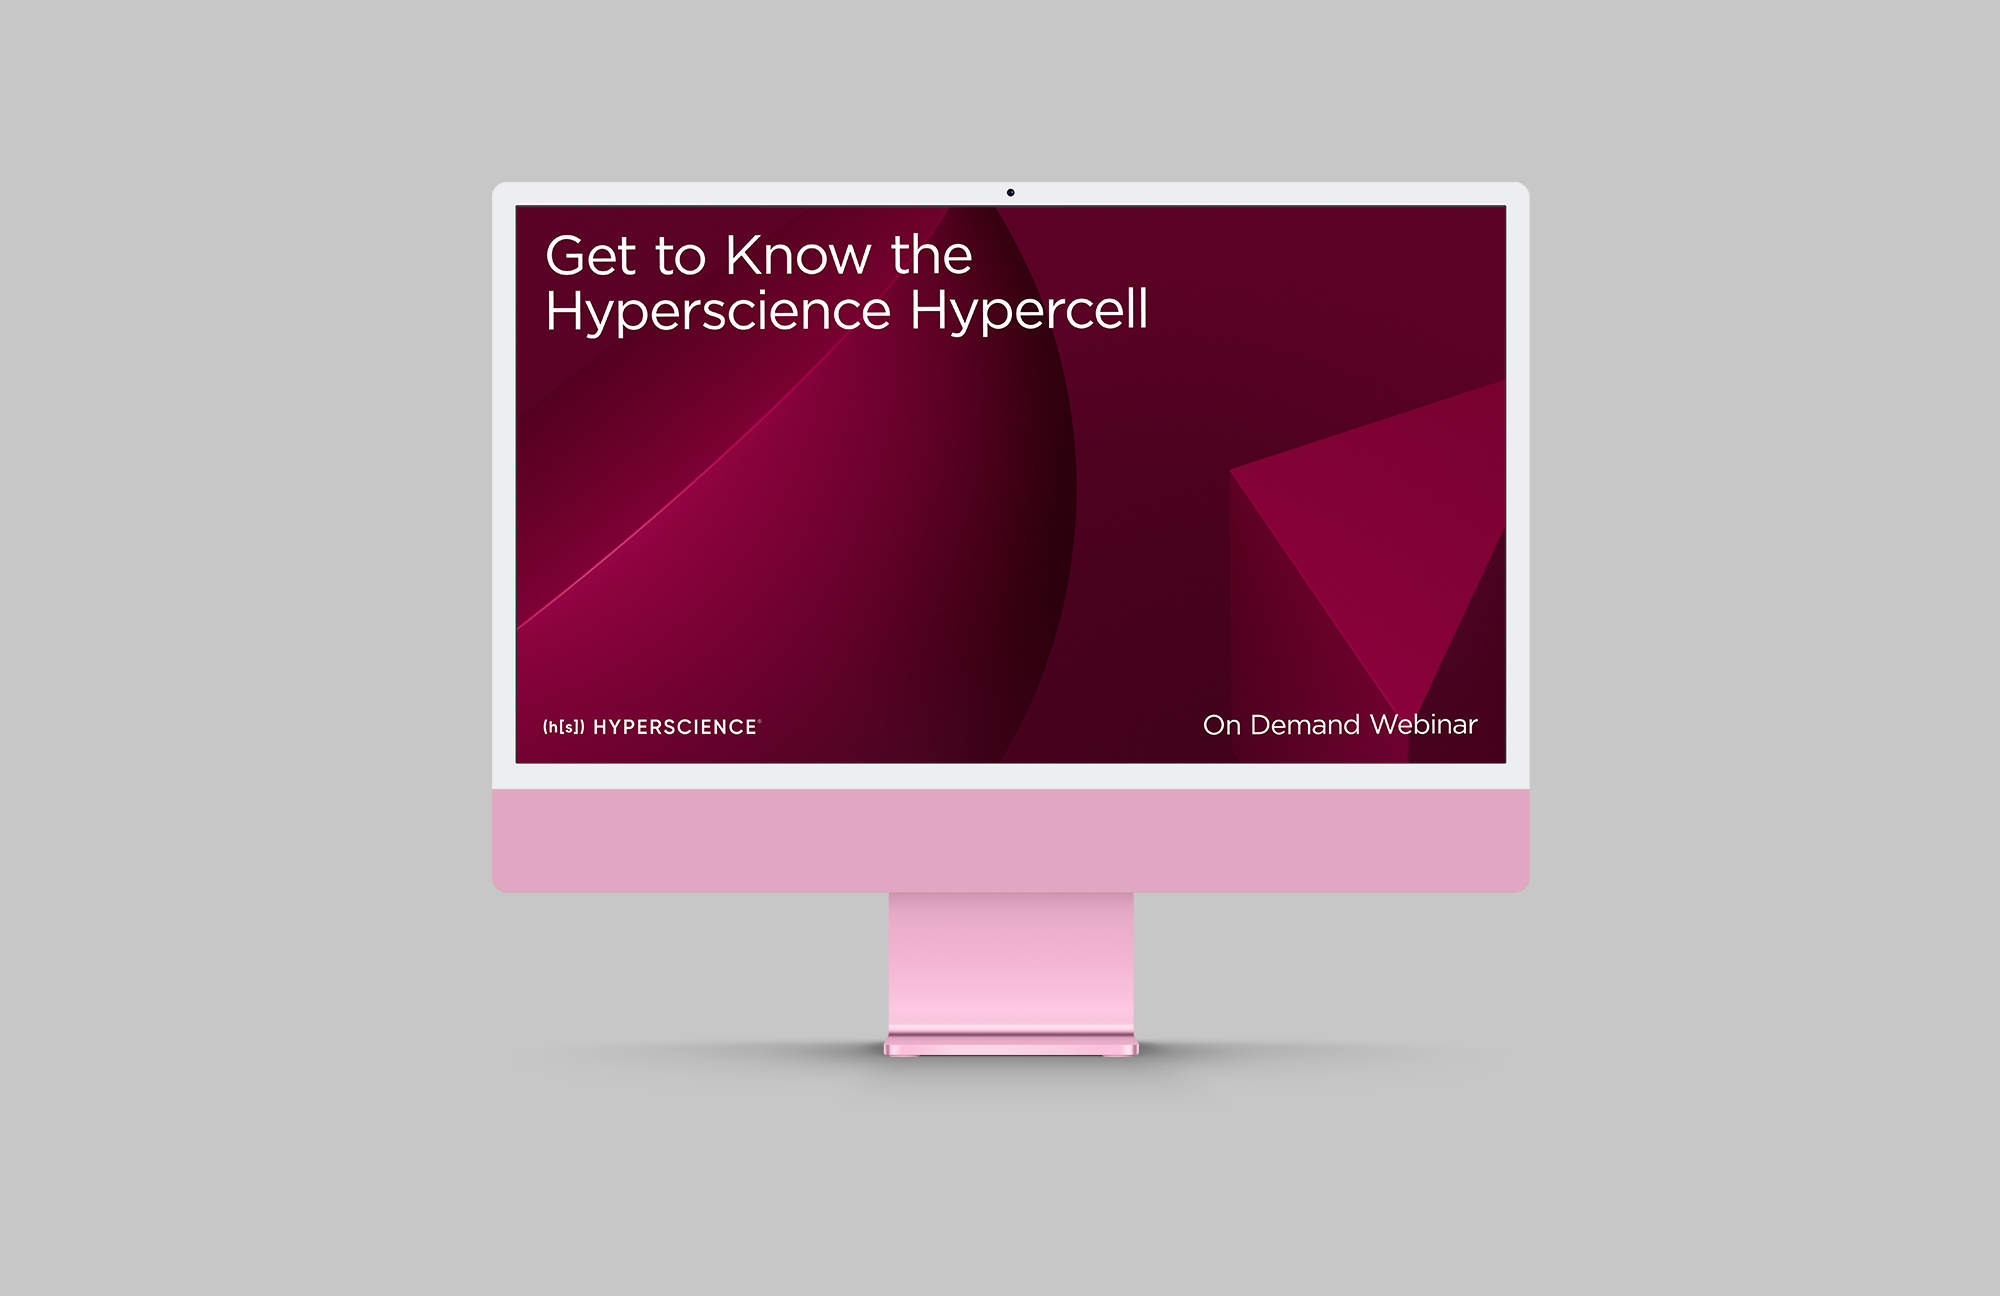 Get to Know the Hyperscience Hypercell